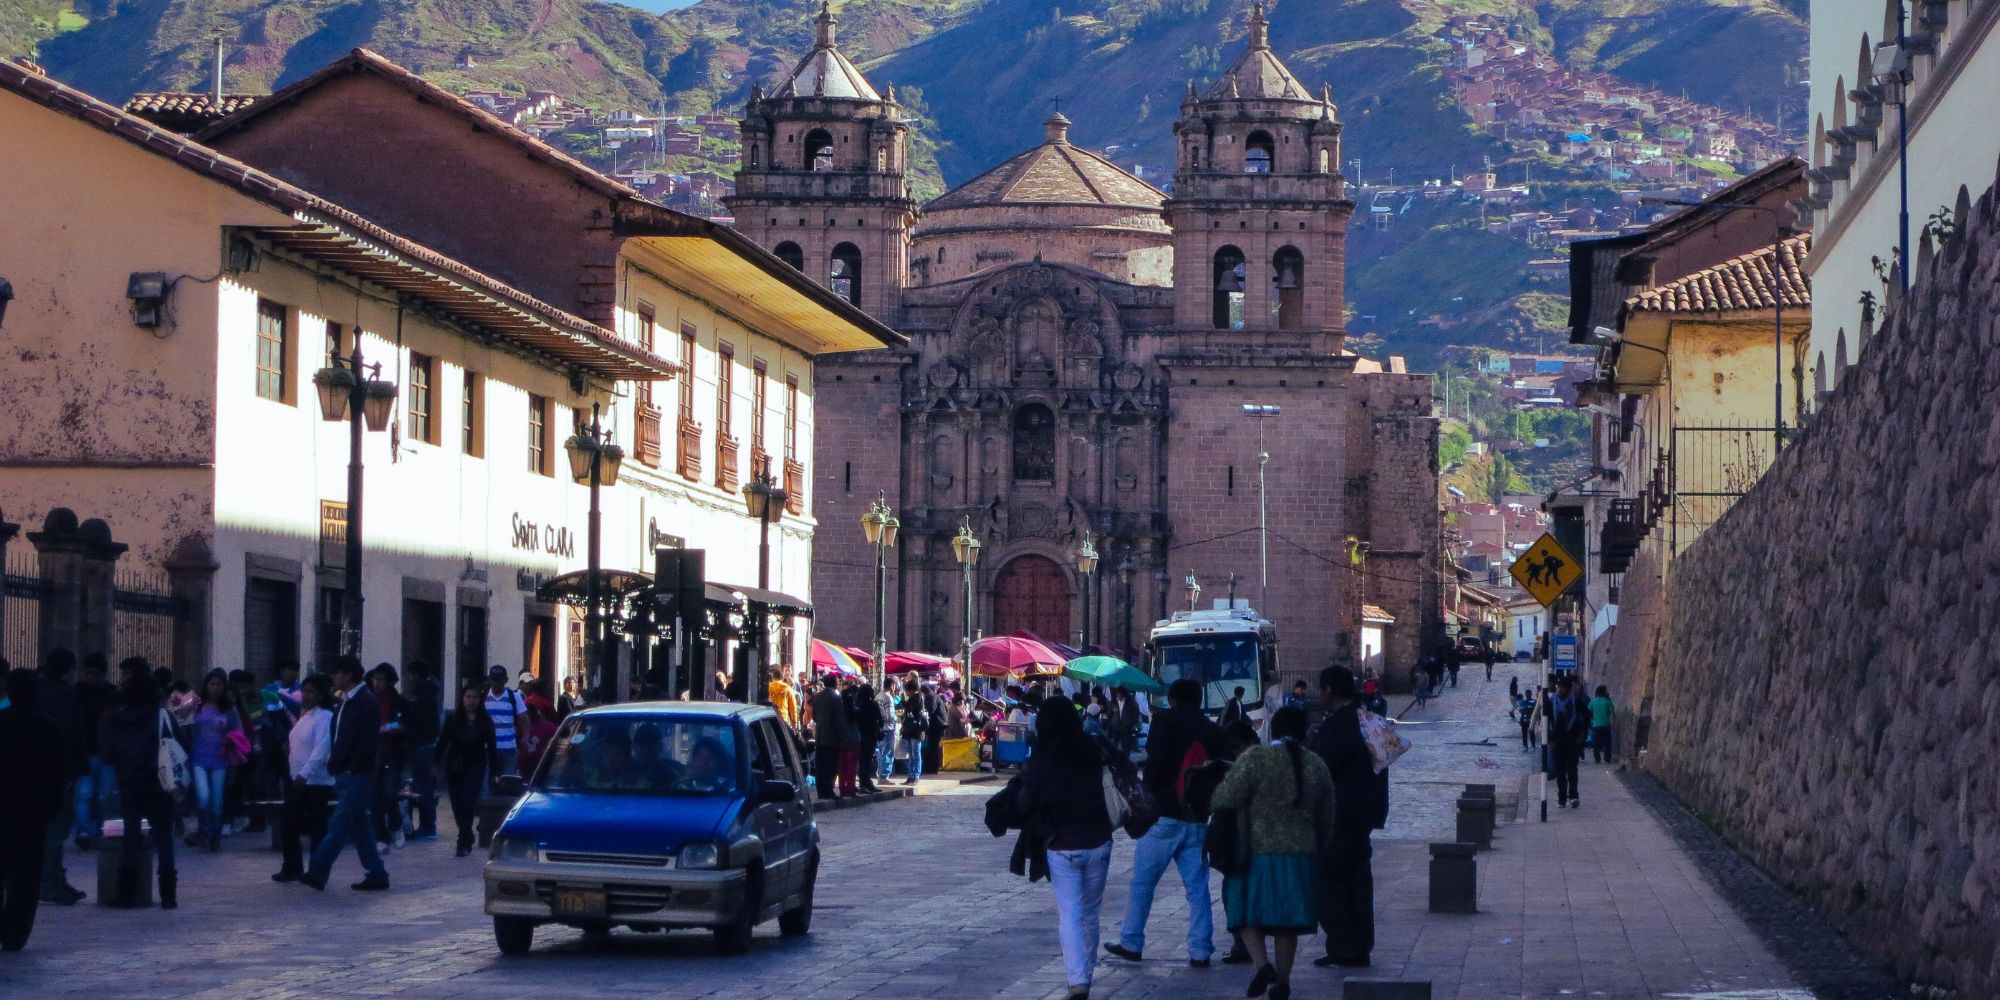 Best Gifts for Someone Going to Peru